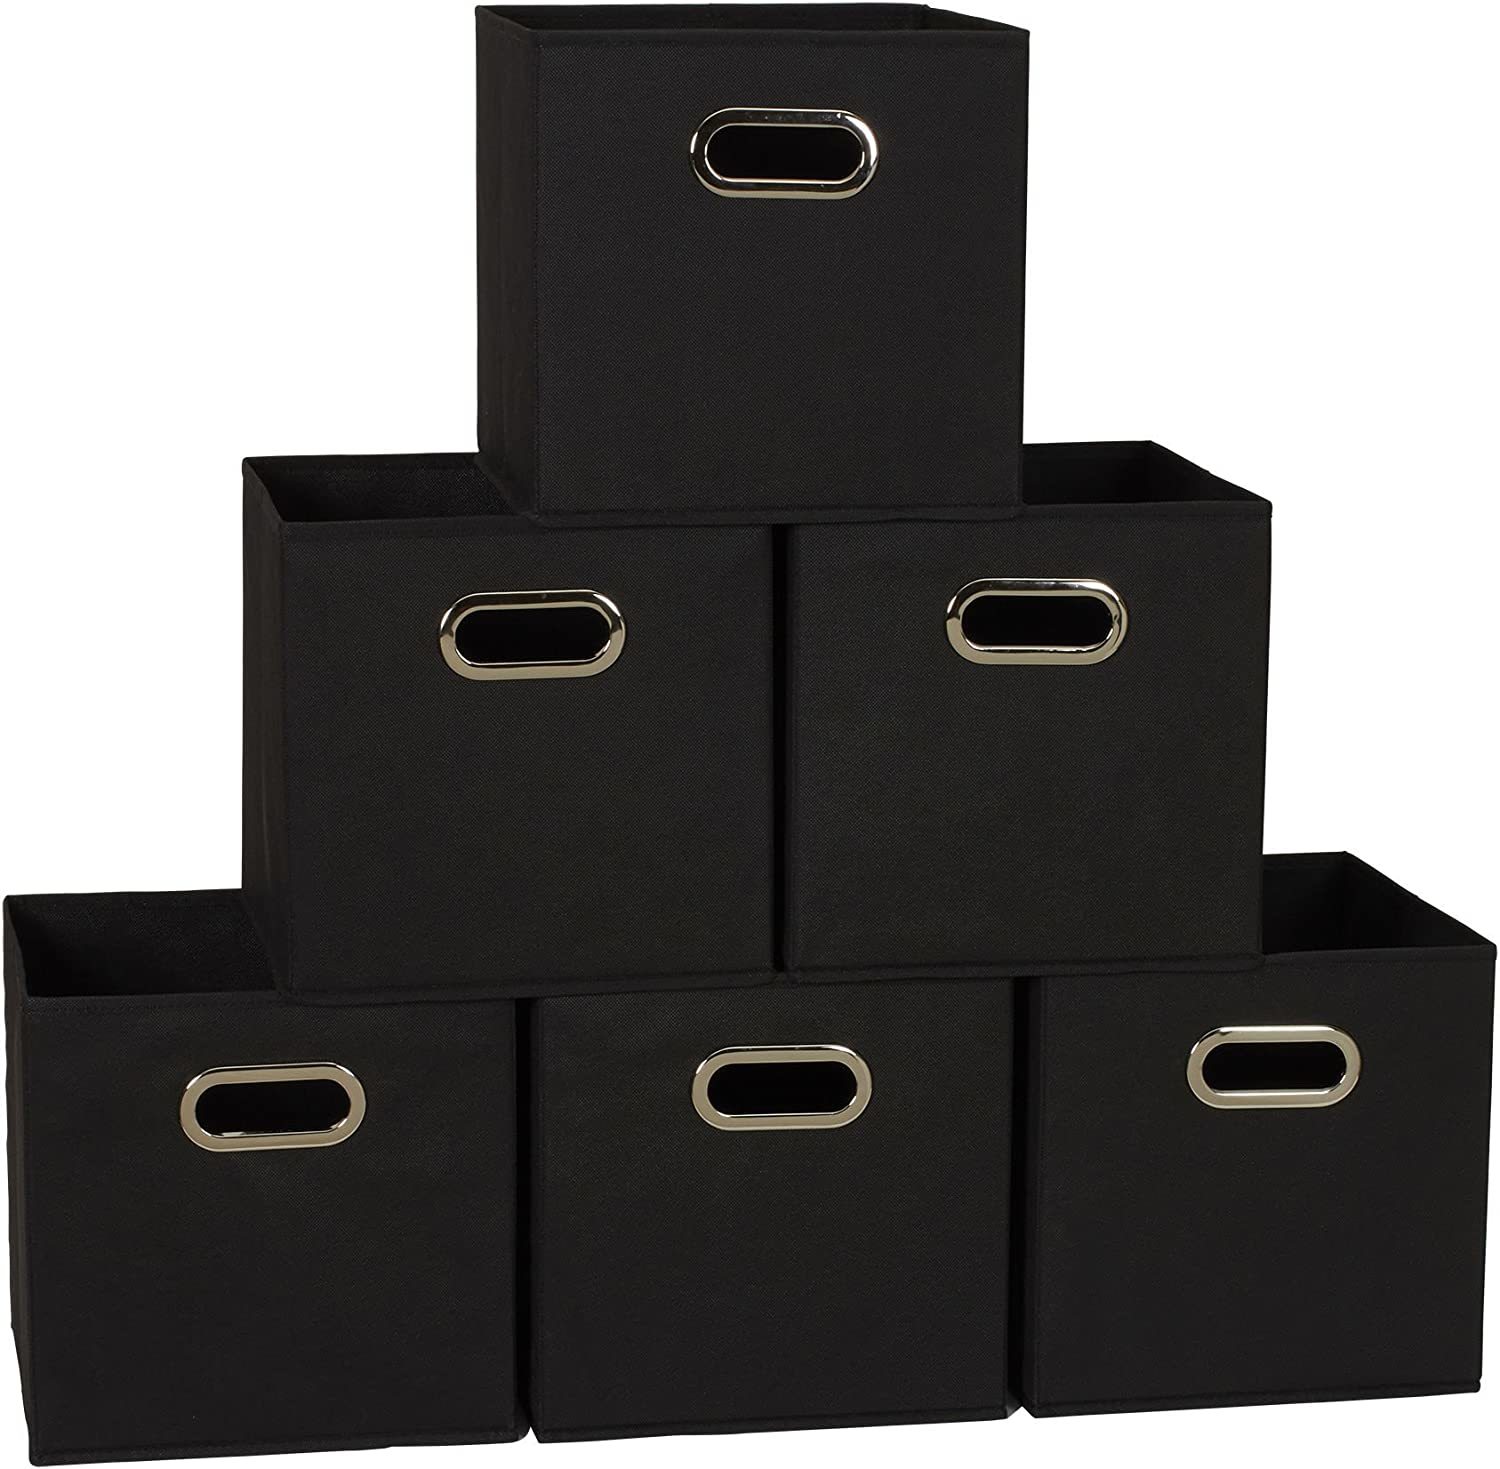 Black Set Of 6 Cubby Cubes With Handles From Household Essentials 80-1 Foldable - $30.99